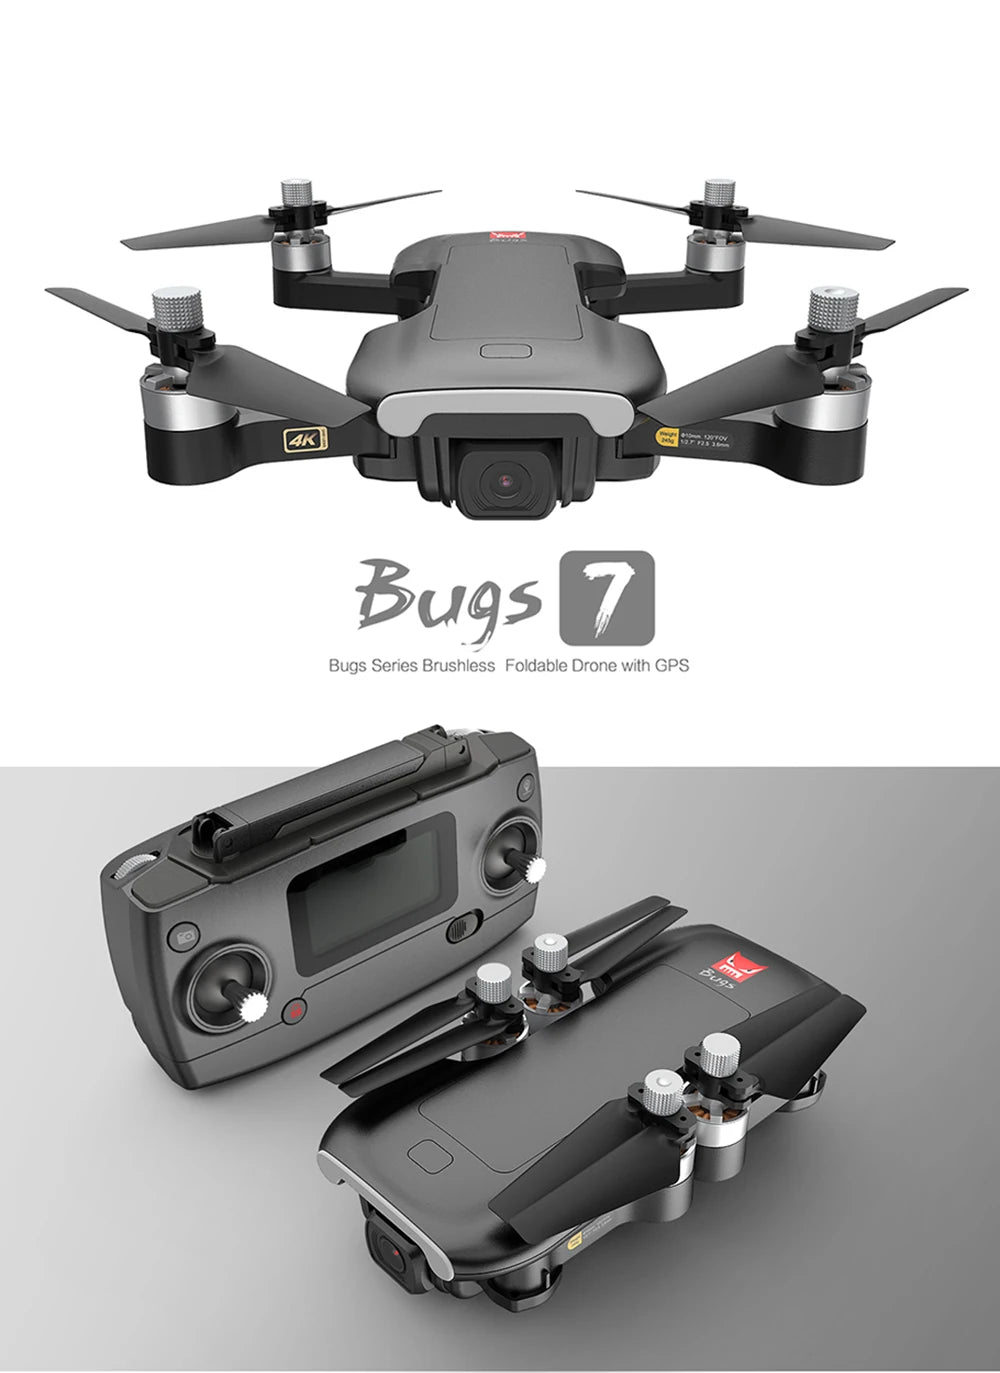 MJX Bugs 7 B7 Drone, bugs series brushless foldable drone with gps 